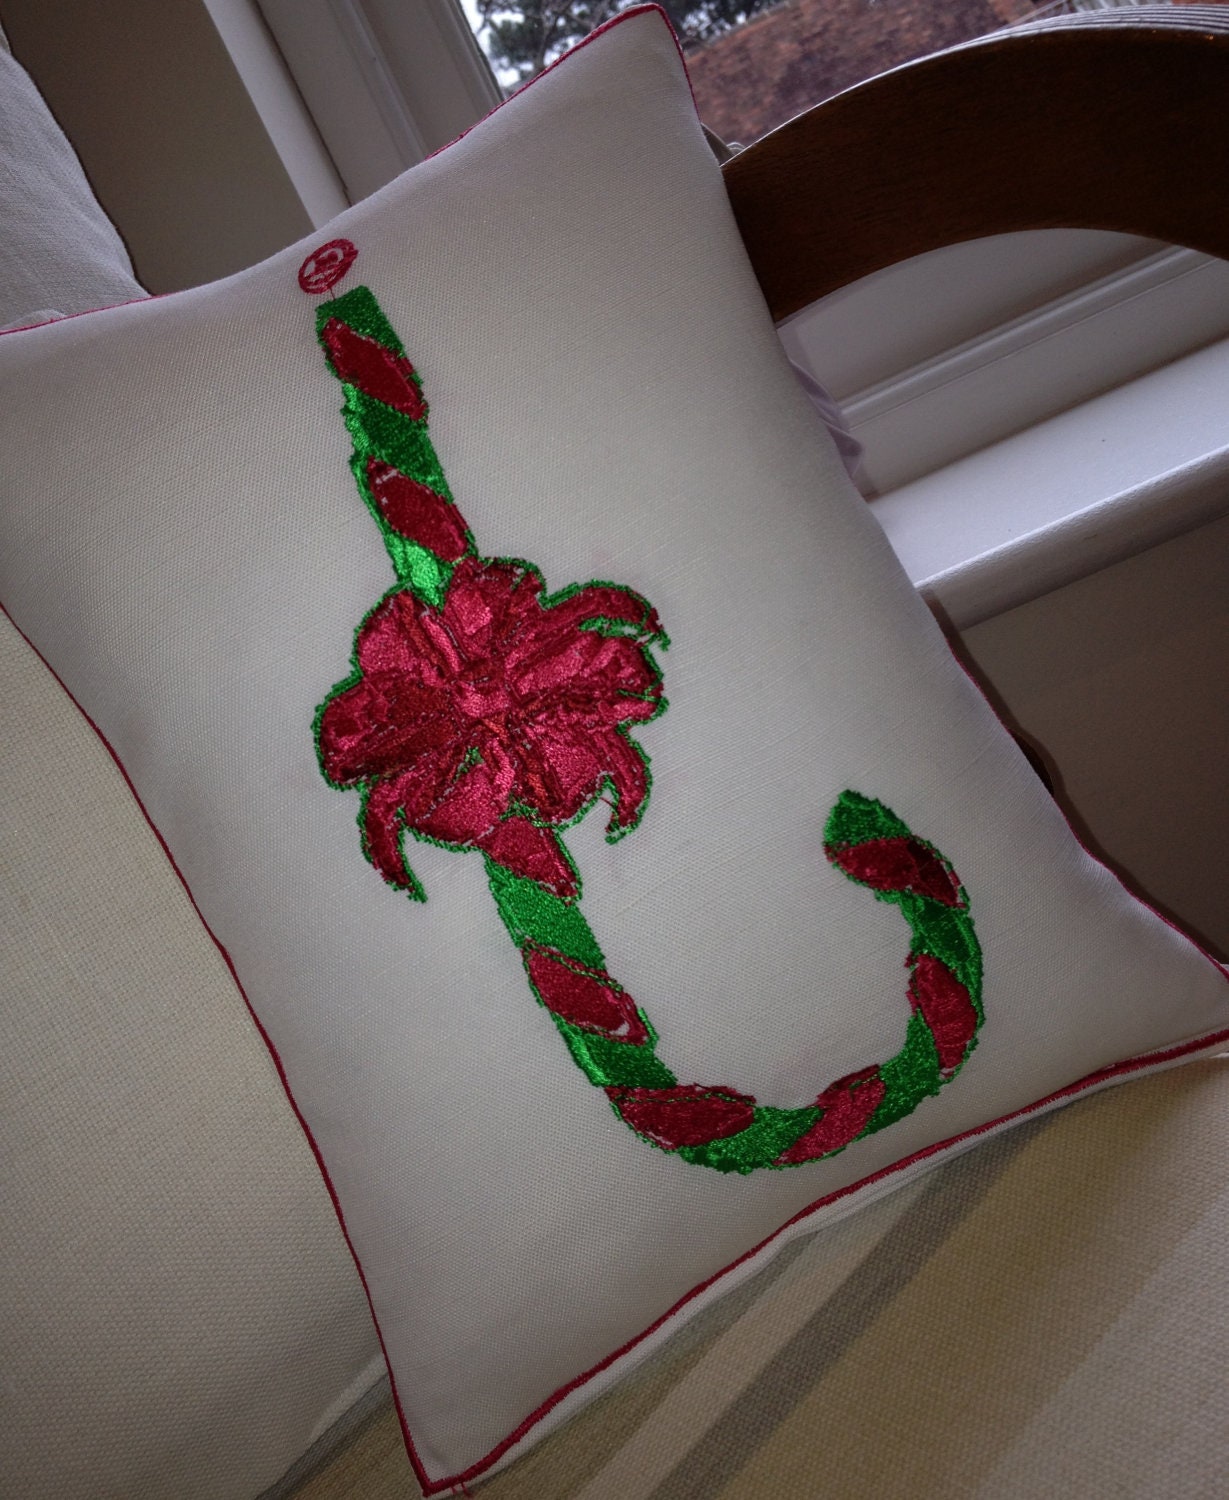 Candy Cane, Artistic Embroidery - Throw Cushion